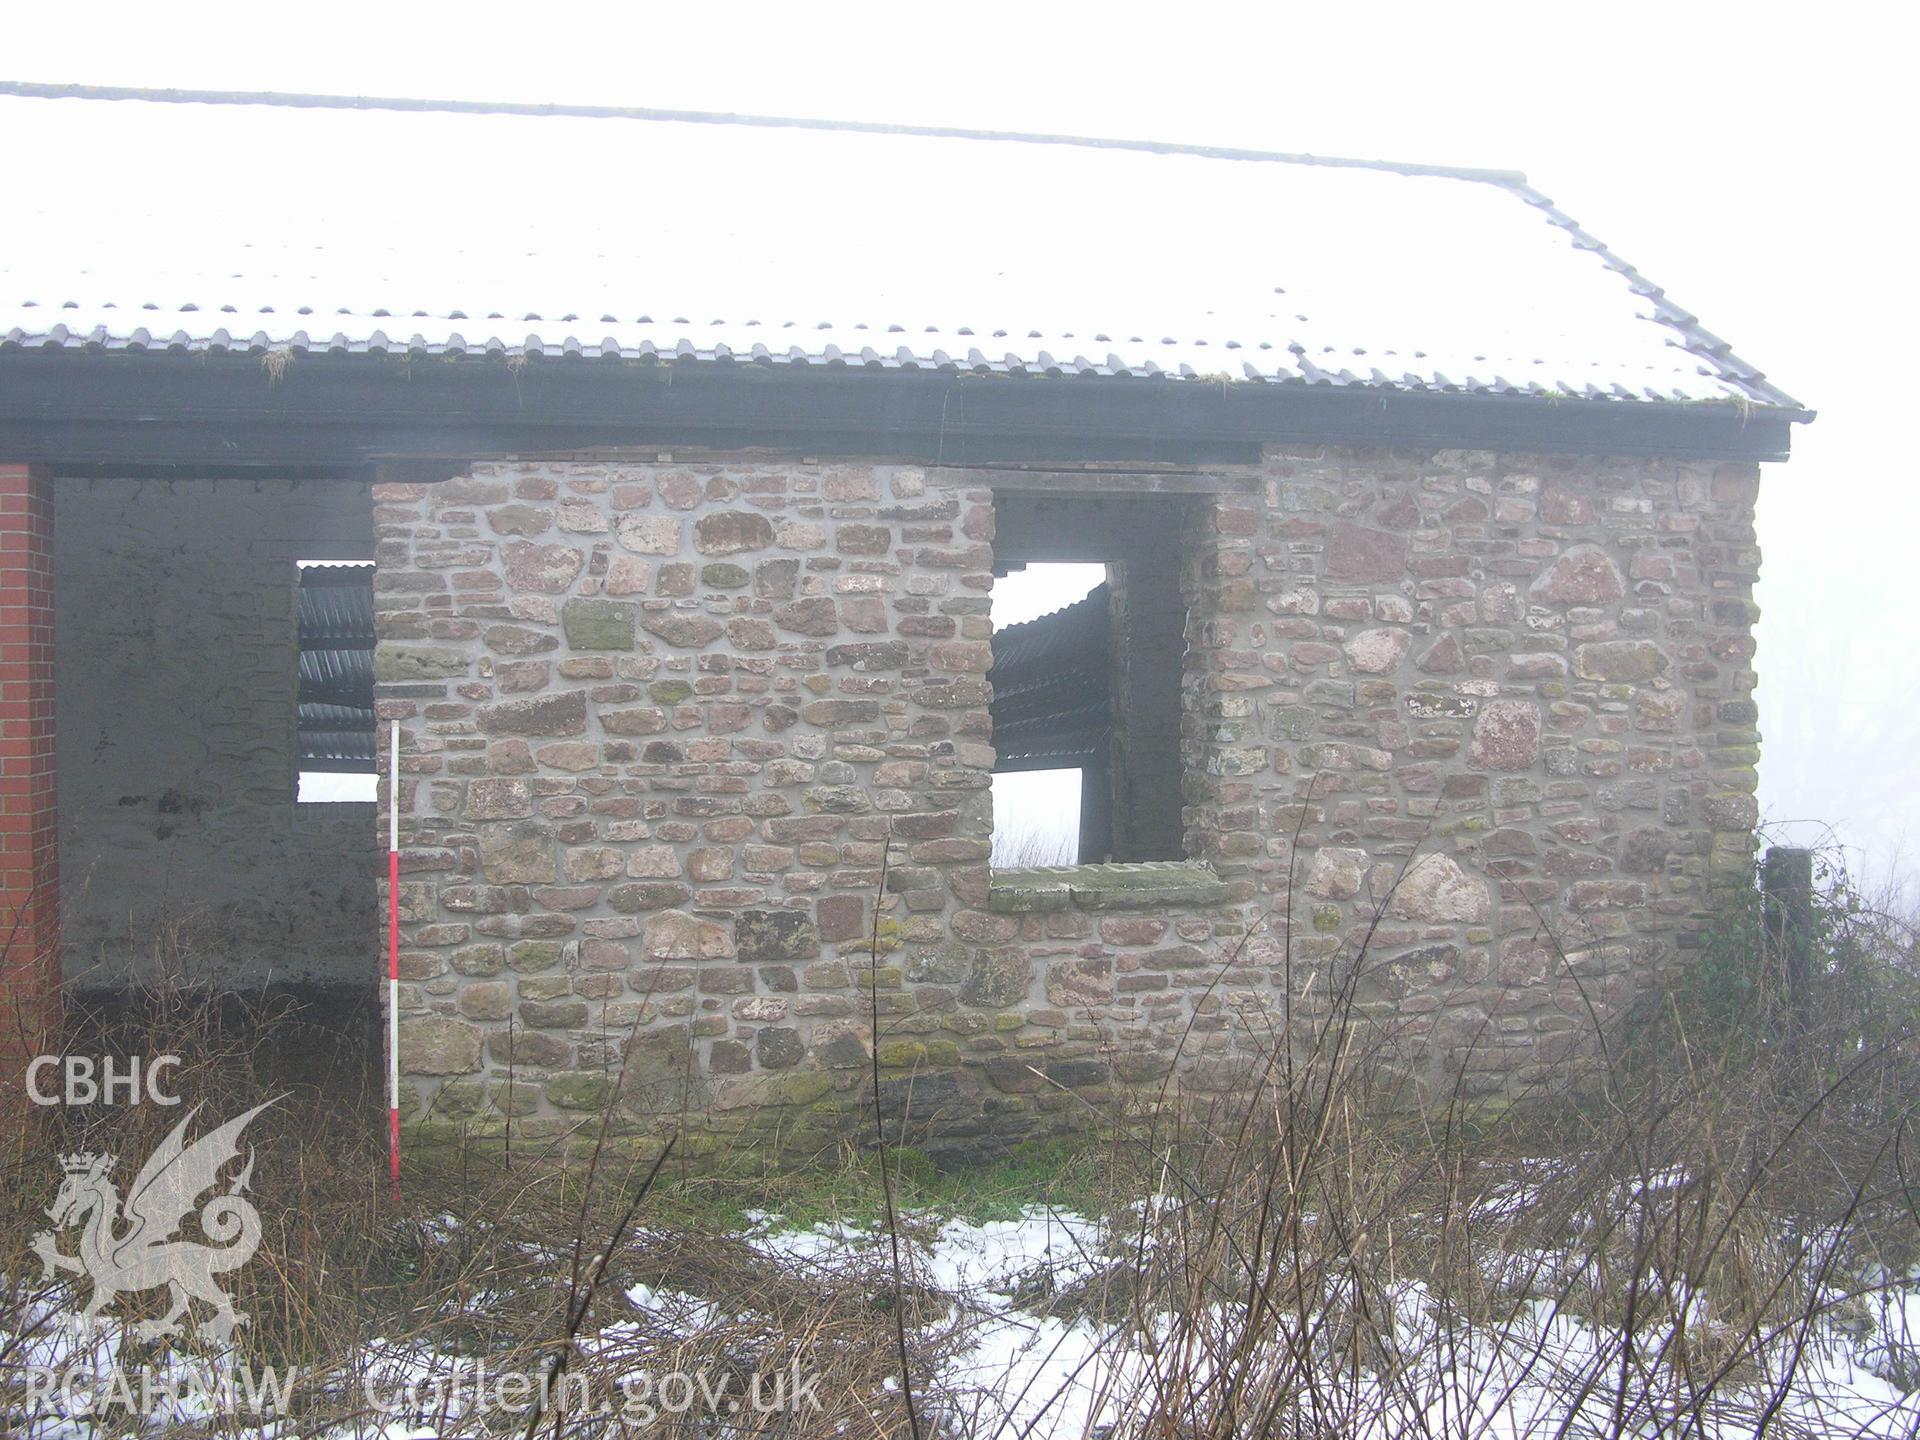 Digital photograph of a general view of the barns exterior, from an Archaeological Building Recording of Hillside Barn, Llanvaches, Monmouthshire, which was conducted by Cambrian Archaeological Projects.